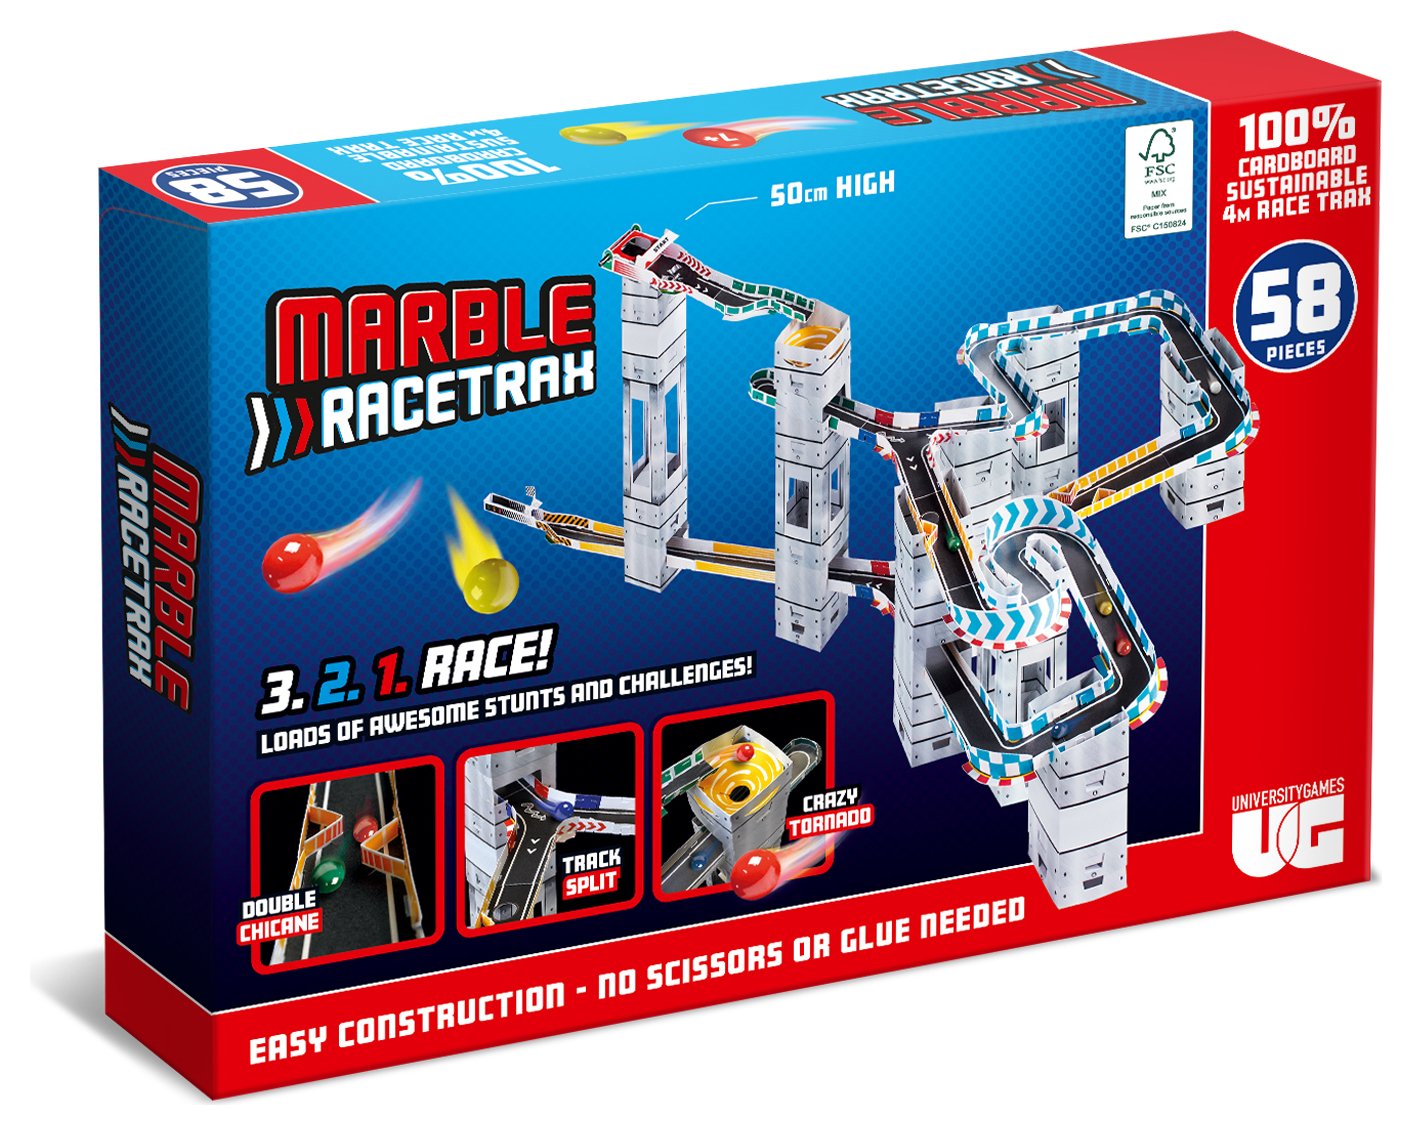 Marble Race Trax - Make Your Own Race Track 58 pcs 3D Puzzle